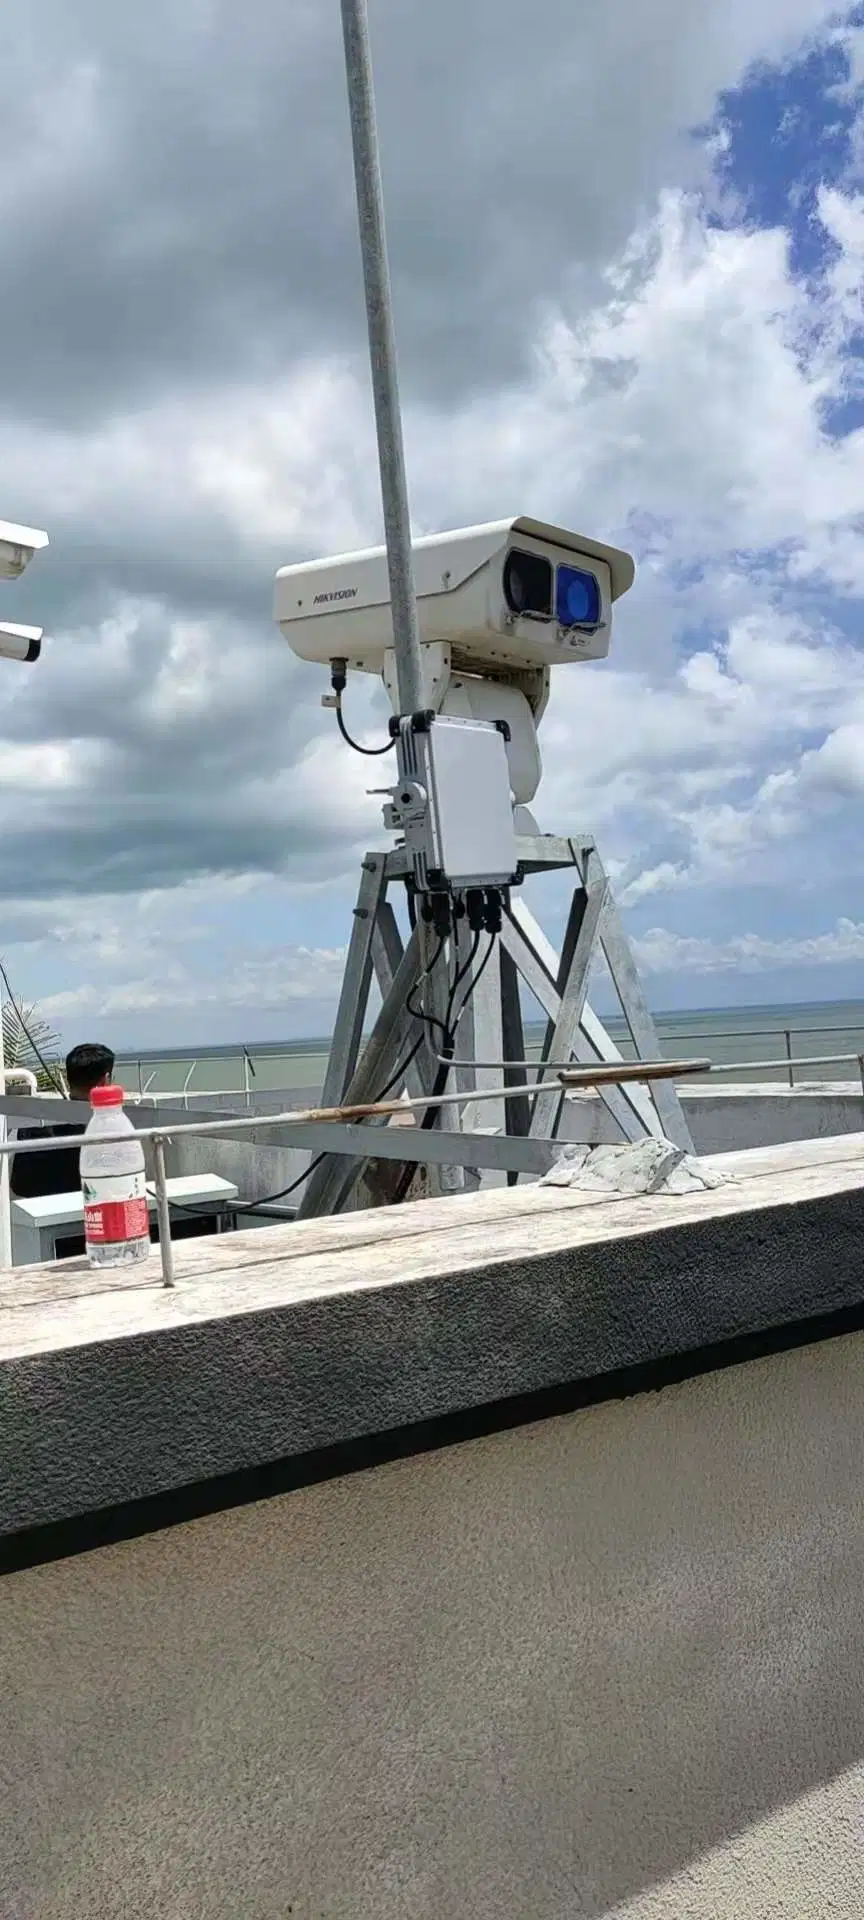 Surveillance Radar to Provide Comprehensive Border and Perimeter Surveillance Through Detection, Classification, and Tracking of Surface and Aerial Intruders